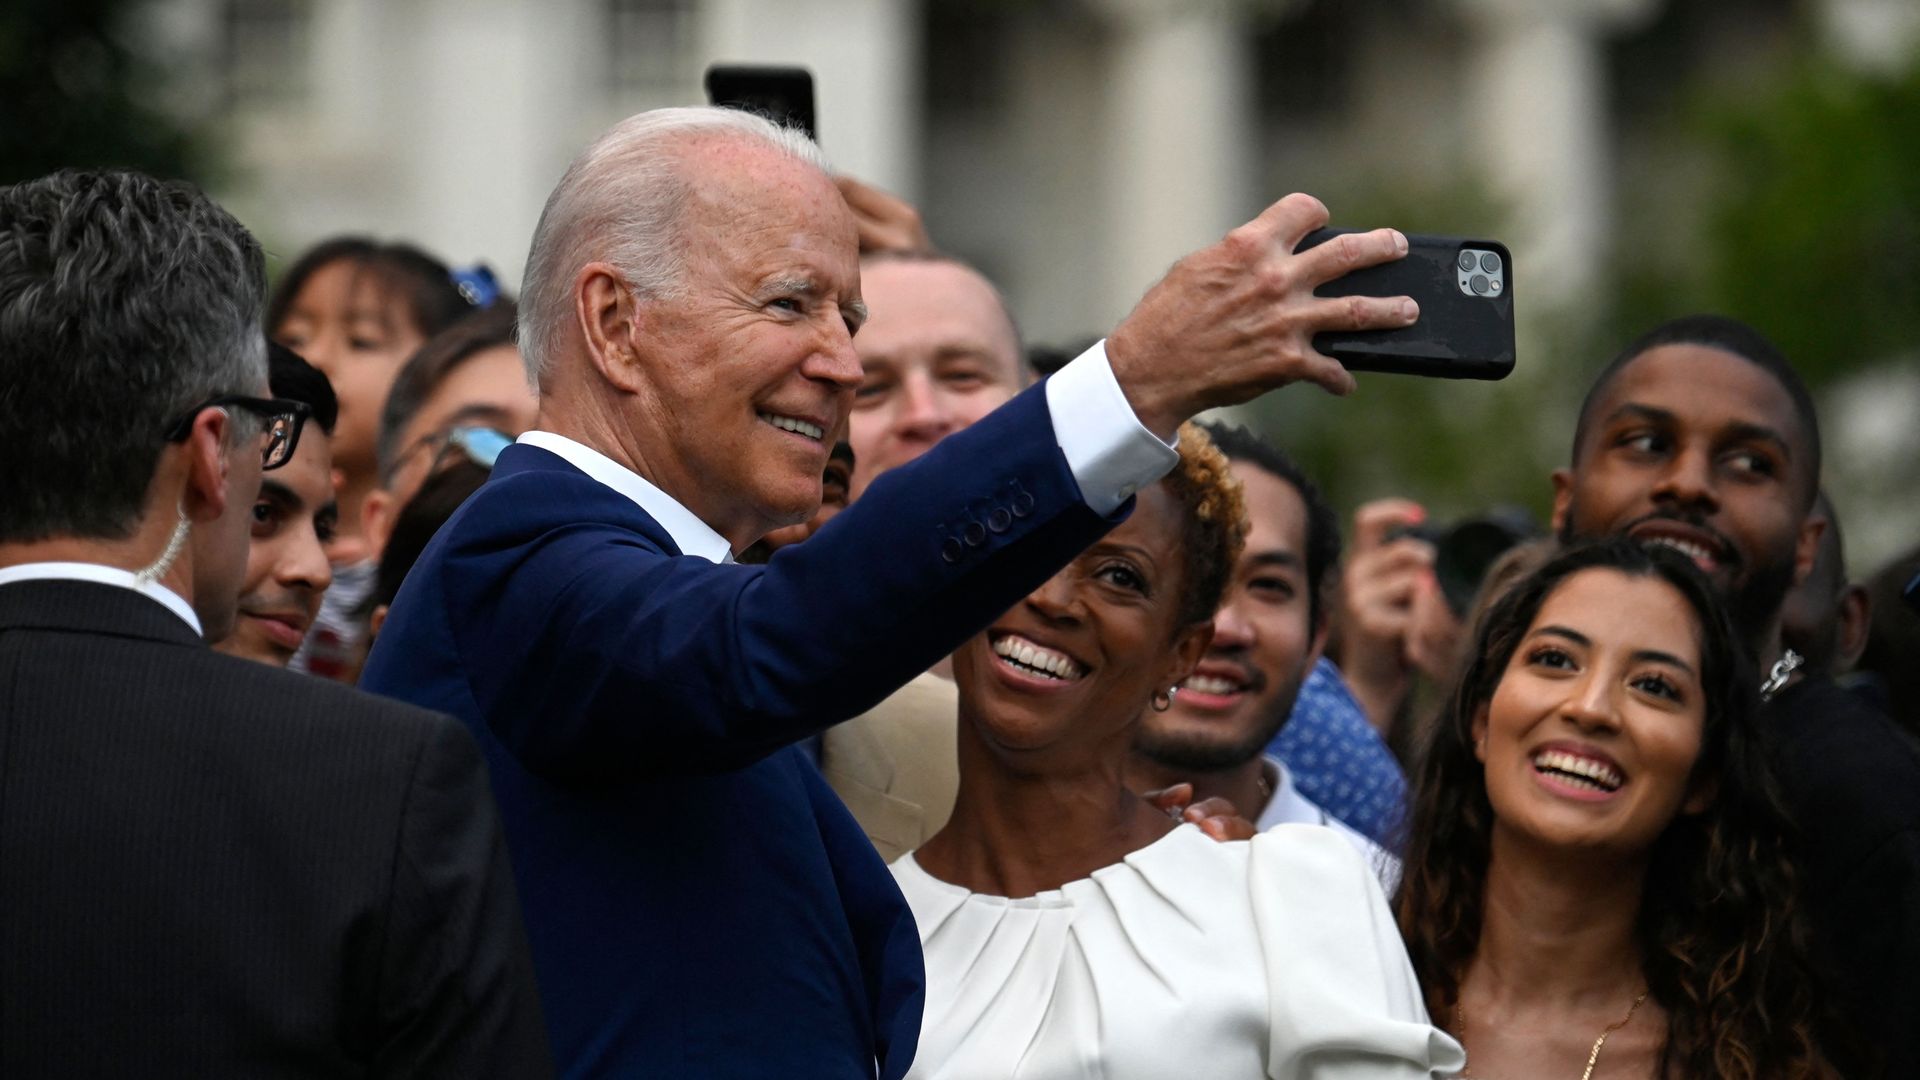 US President Joe Biden poses for a selfie with guests after delivering a speech during Independence Day celebrations on the South Lawn of the White House.